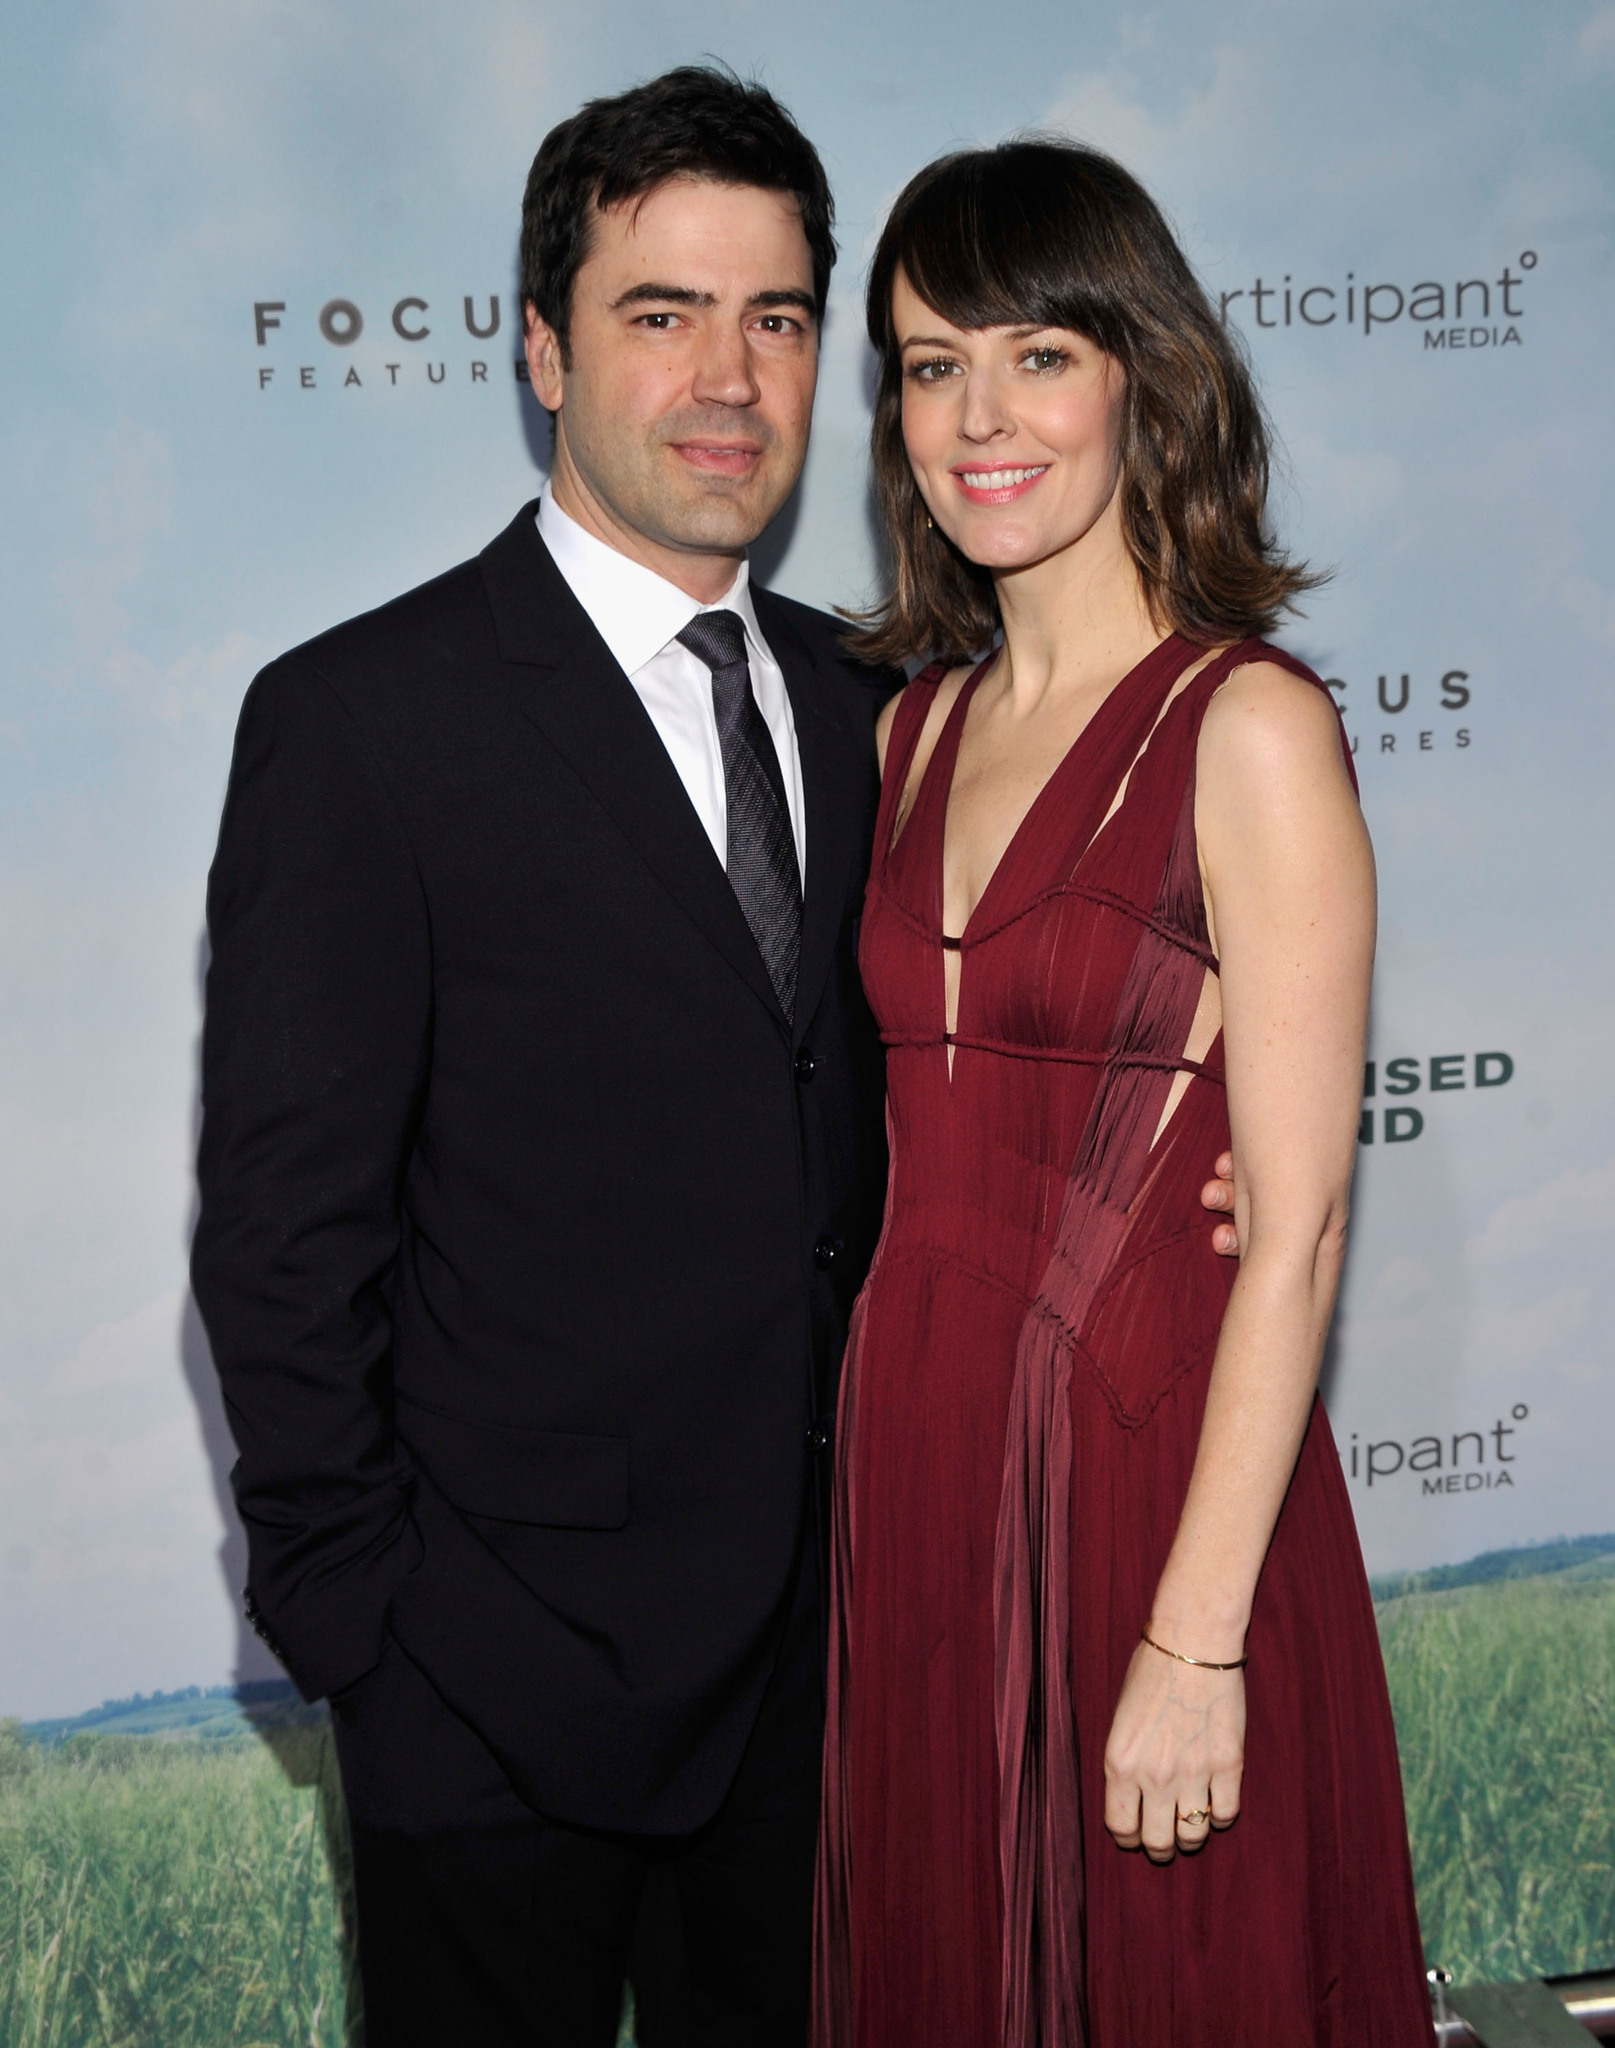 Ron Livingston and Rosemarie DeWitt at event of Promised Land (2012)